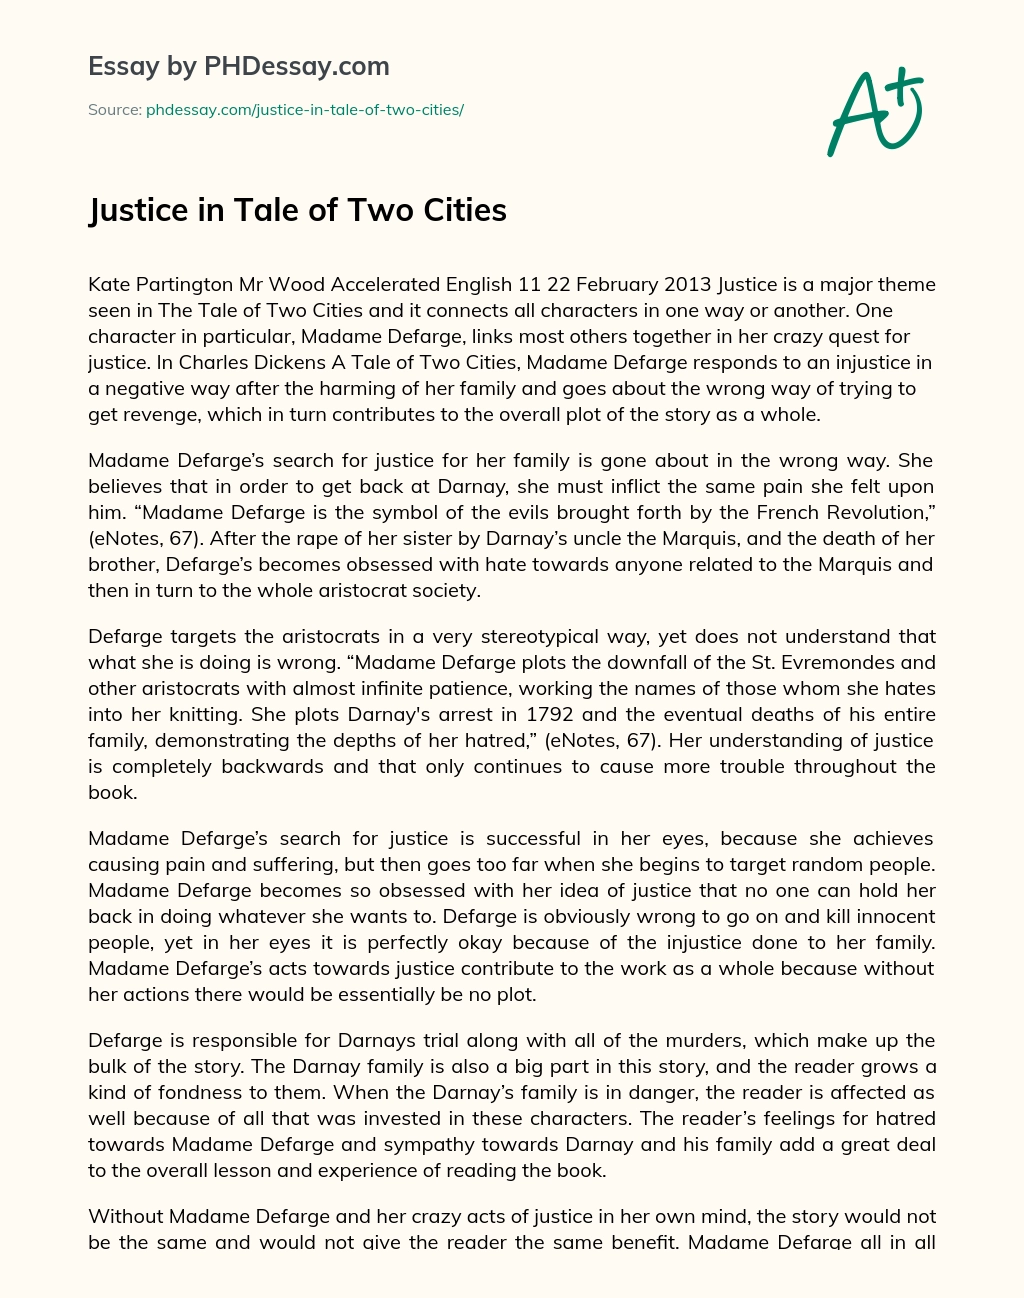 Justice in Tale of Two Cities essay